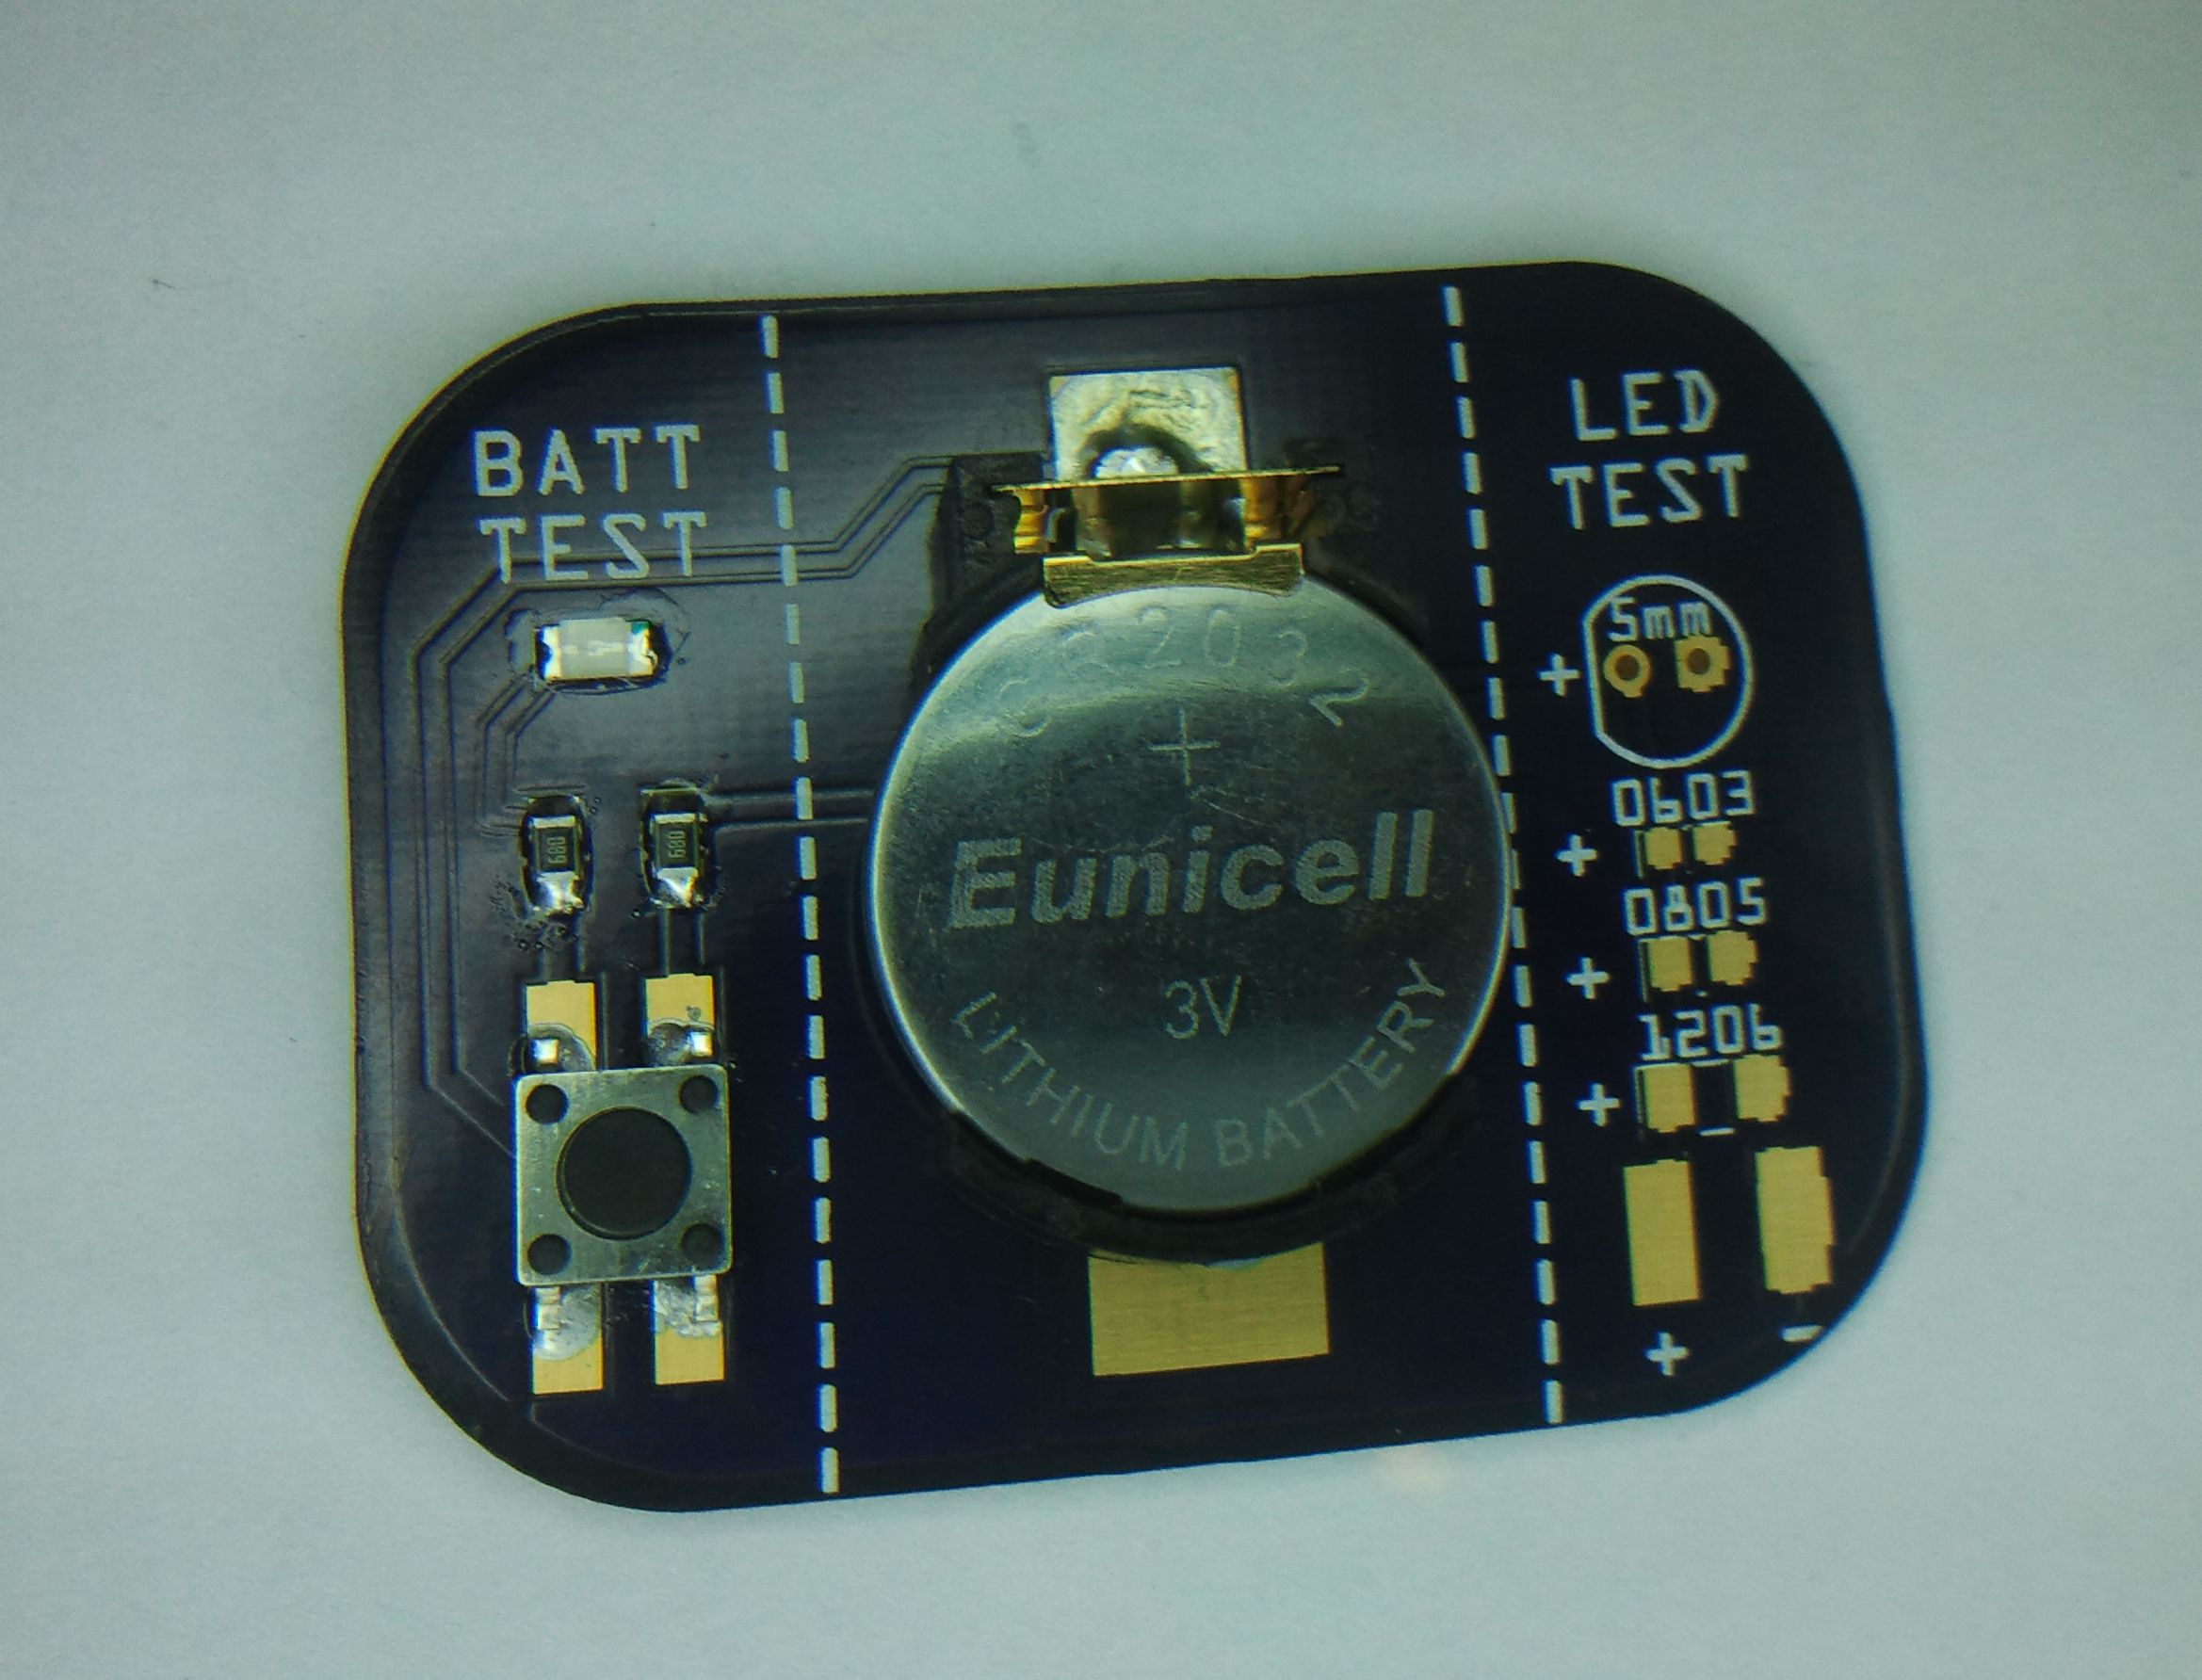 Simple SMD LED tester 